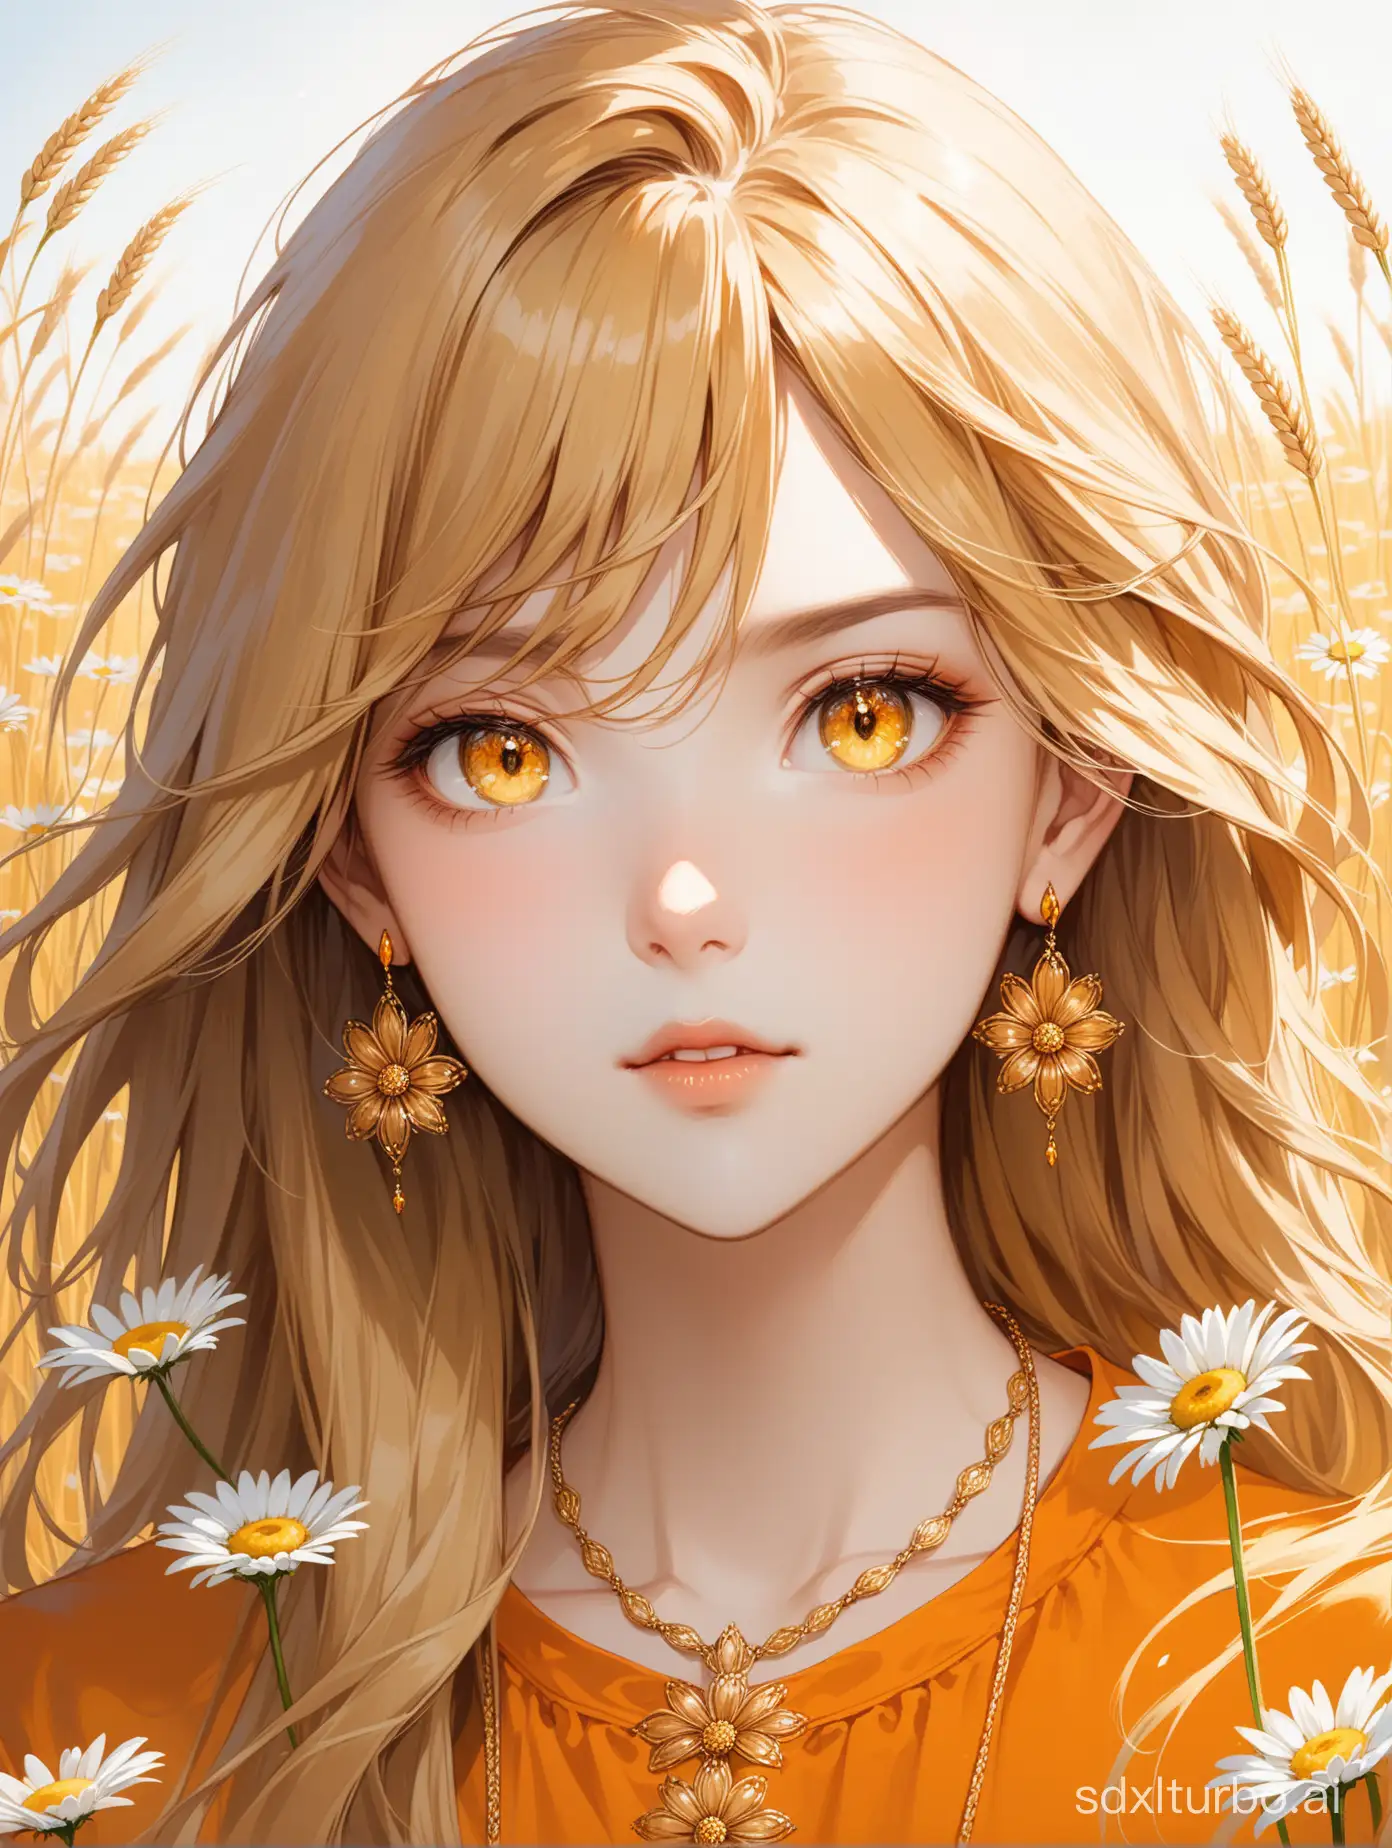 Highest quality, masterpiece, a girl, long wheat-colored hair, slightly curled, yellow earrings, necklace, (orange clothing), (exquisite depiction of hair), (exquisite depiction of yellow eyes), (exquisite depiction of facial features), solo, (daisies), portrait description, sense of fragmentation